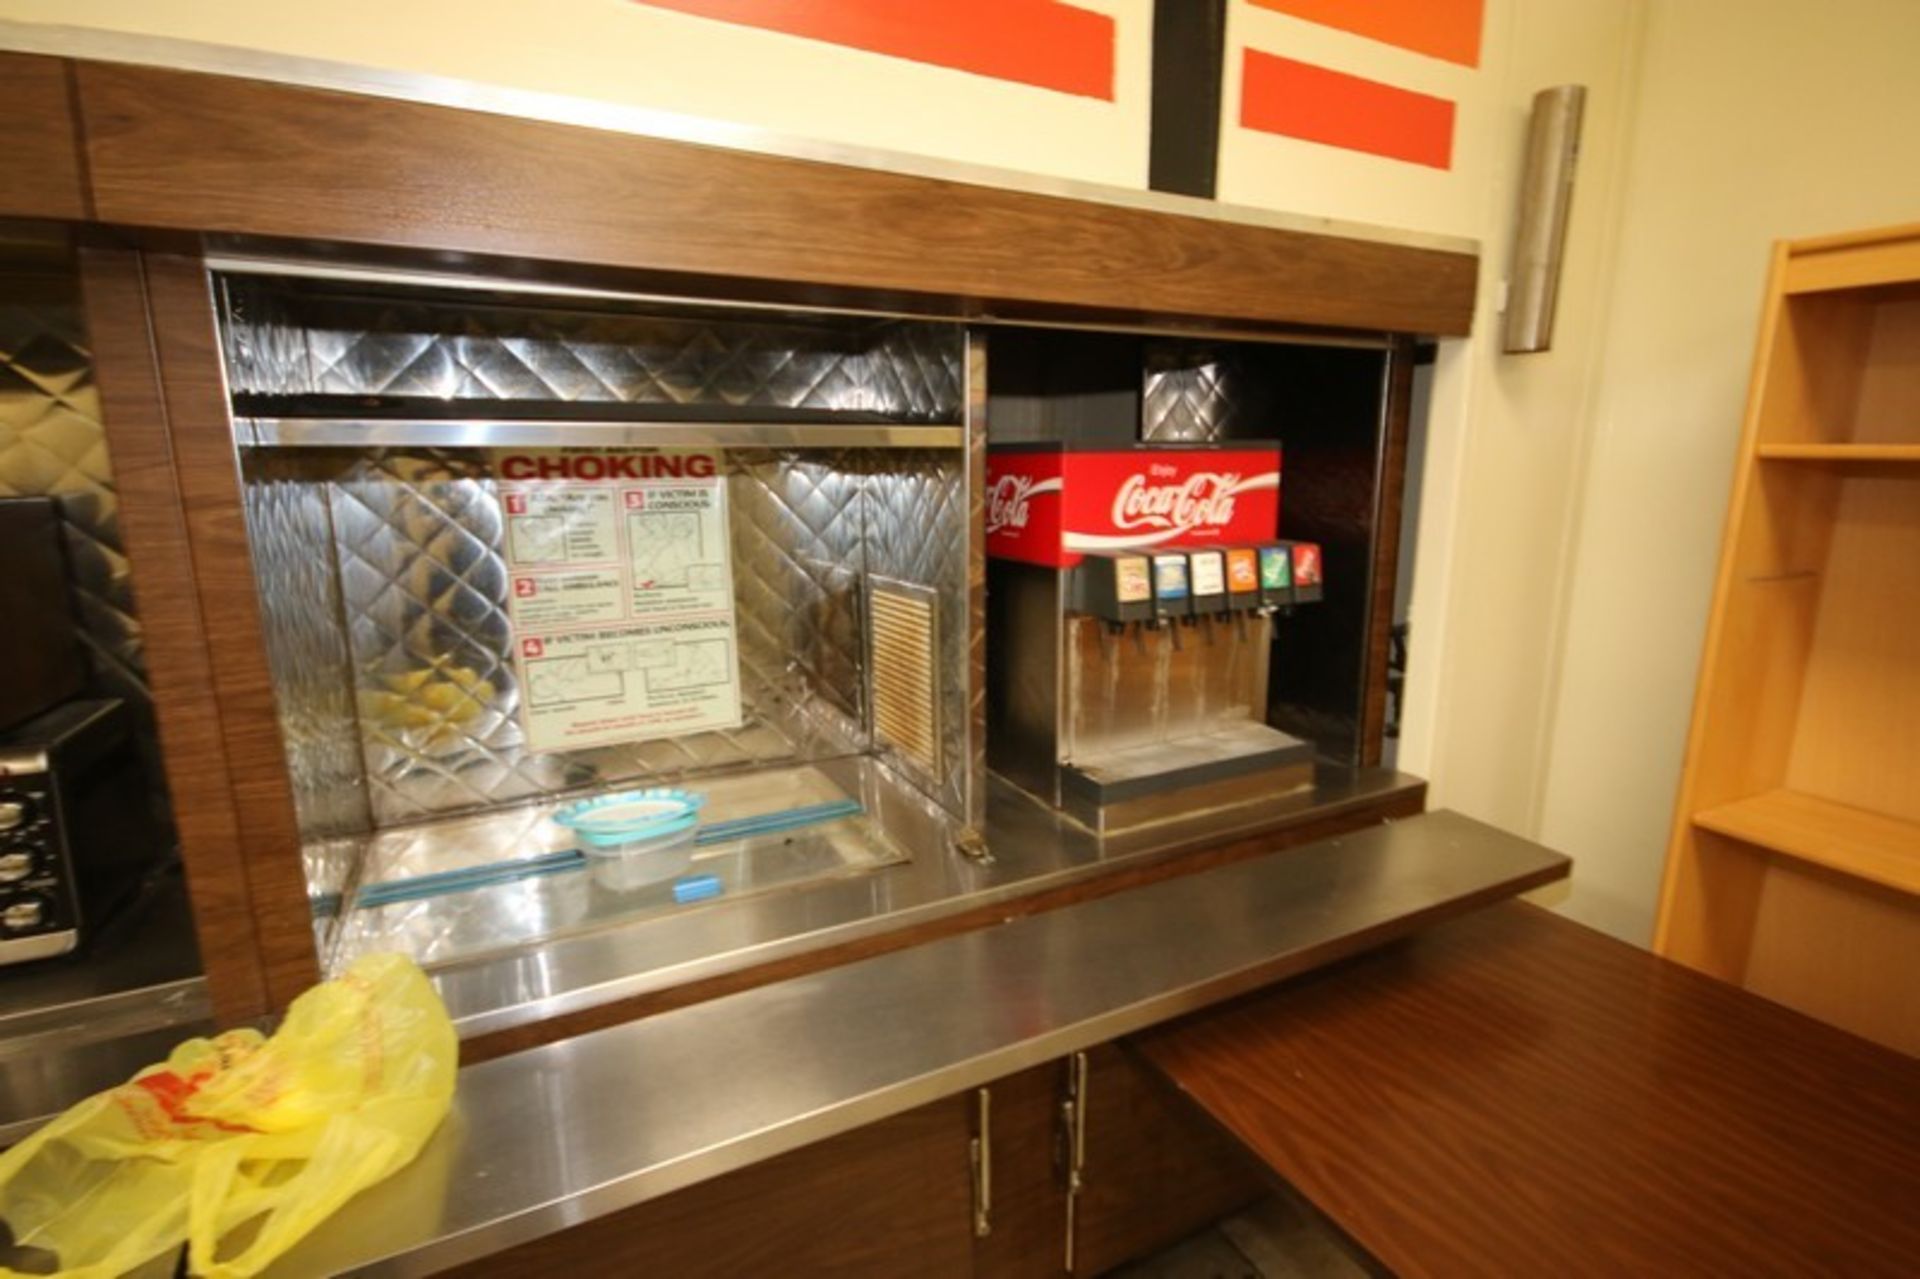 Contents of Break Room, Includes (2) Soda Dispensing Machines, 2-Shelf S/S Warming Station, - Image 4 of 7